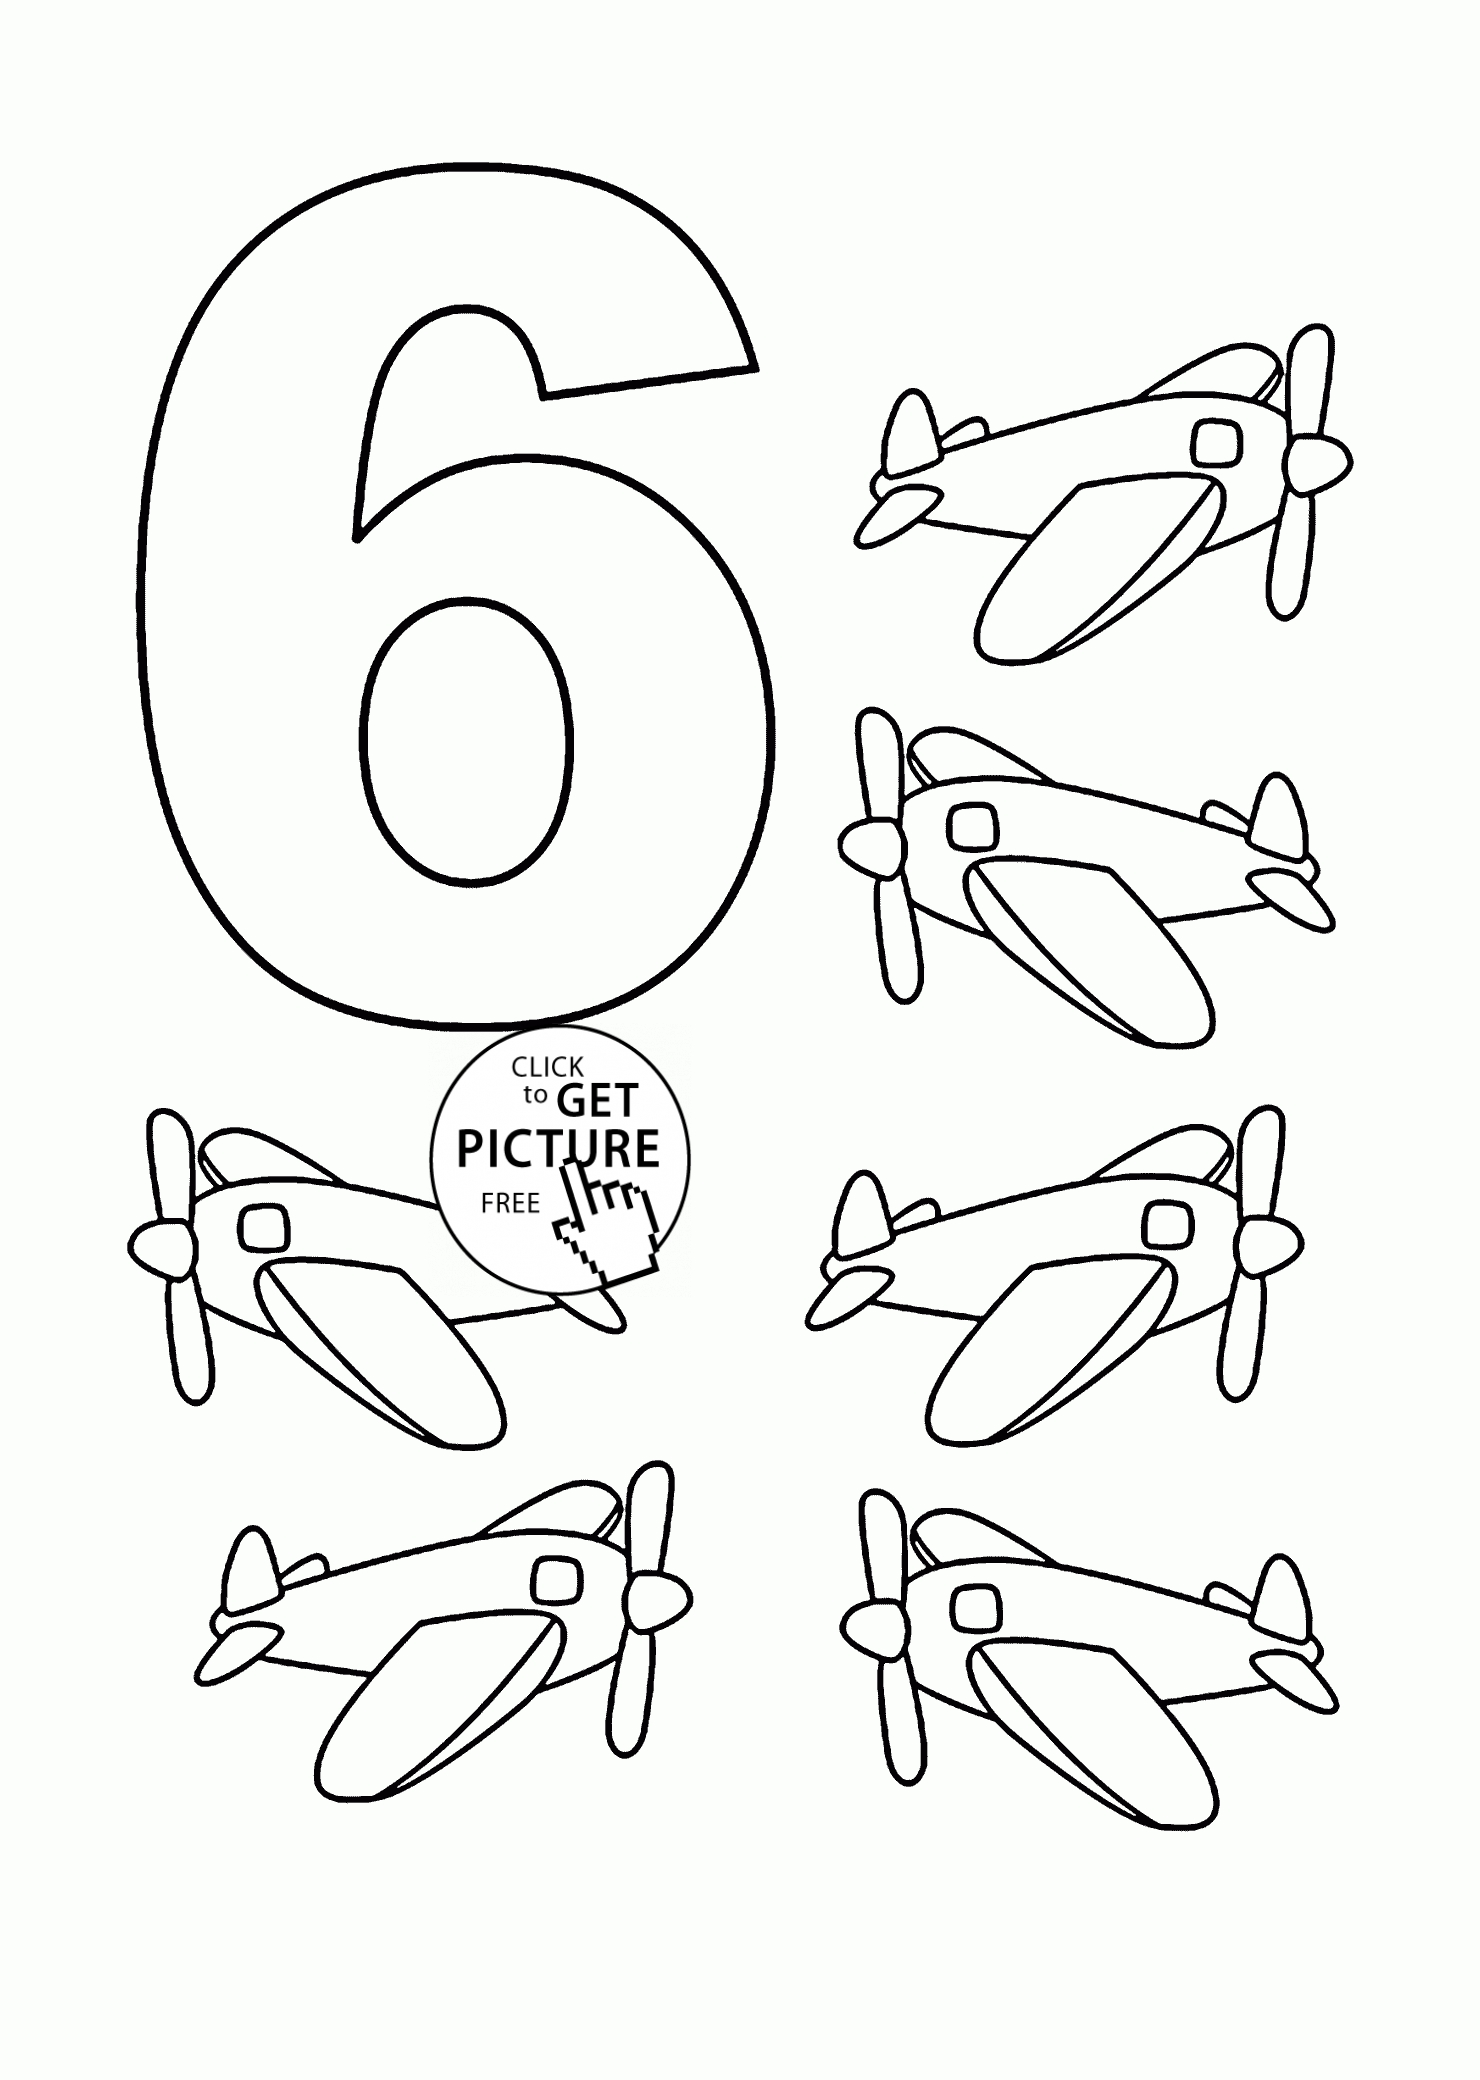 Number 16 Coloring Page at GetColoringscom Free